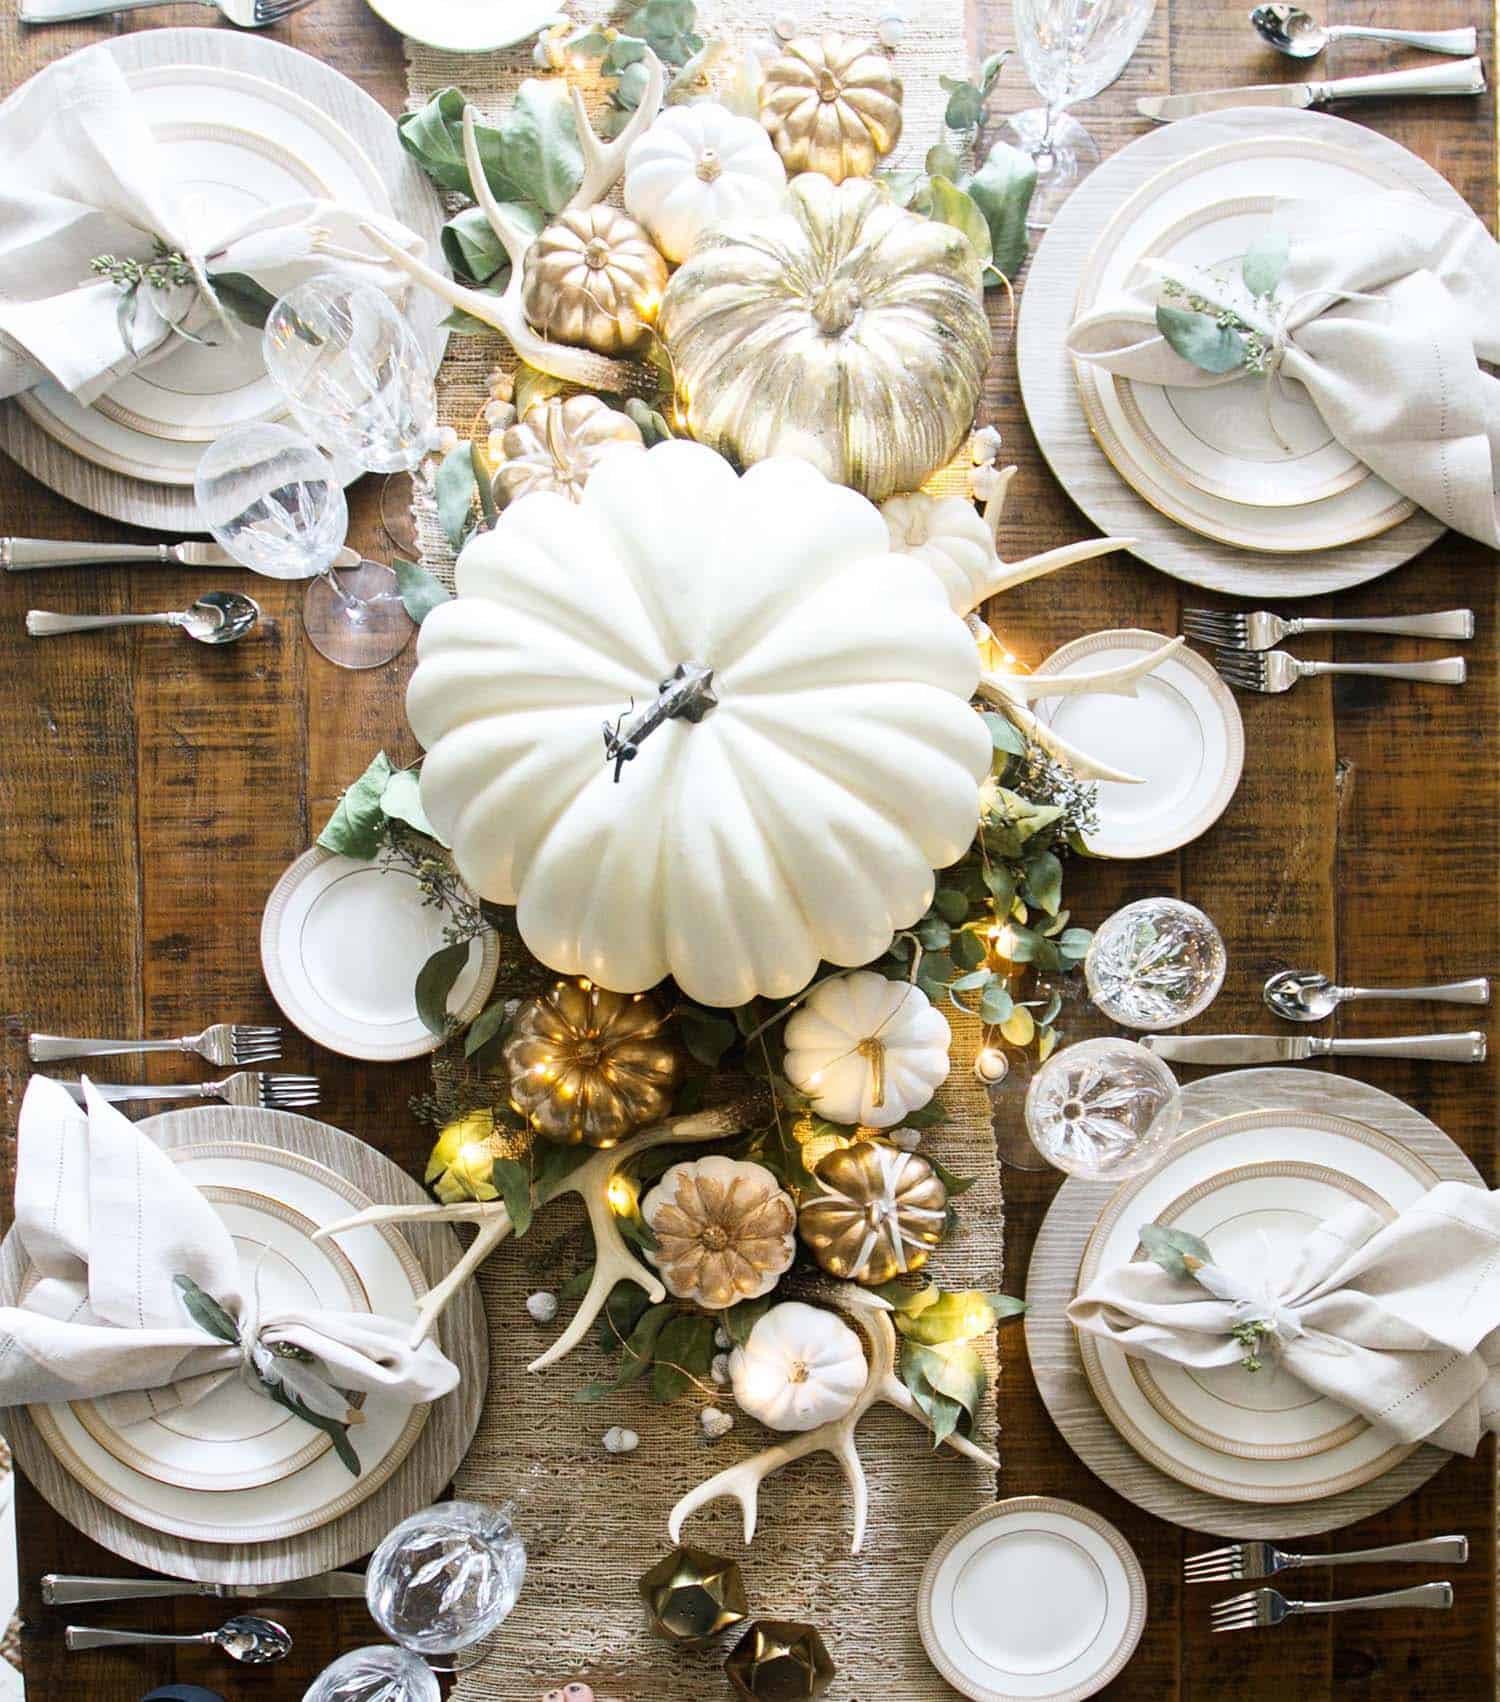 25+ Beautiful And Elegant Centerpiece Ideas For A Thanksgiving Table - Table Centerpieces Ideas For Thanksgiving